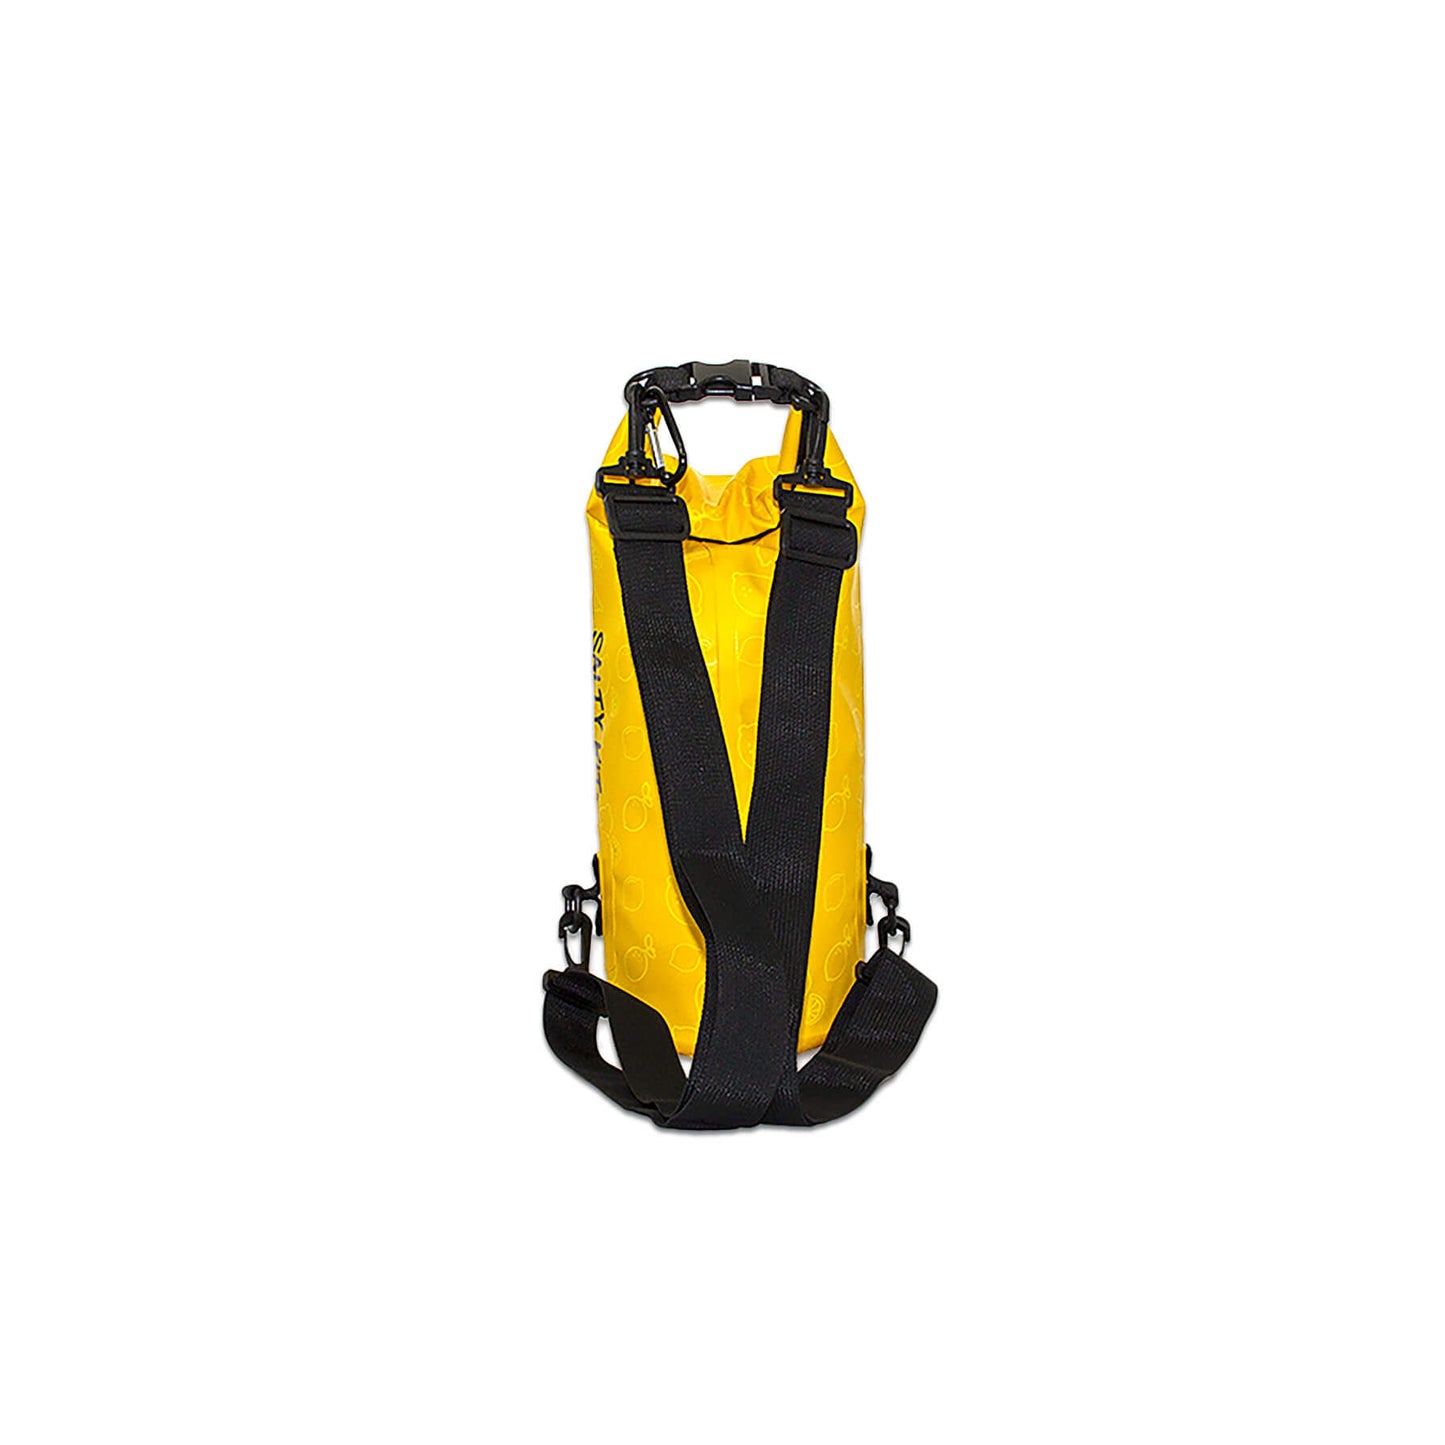 waterproof dry bag 5 litres a handy grab size with detachable straps and carabiner  lemonade back view